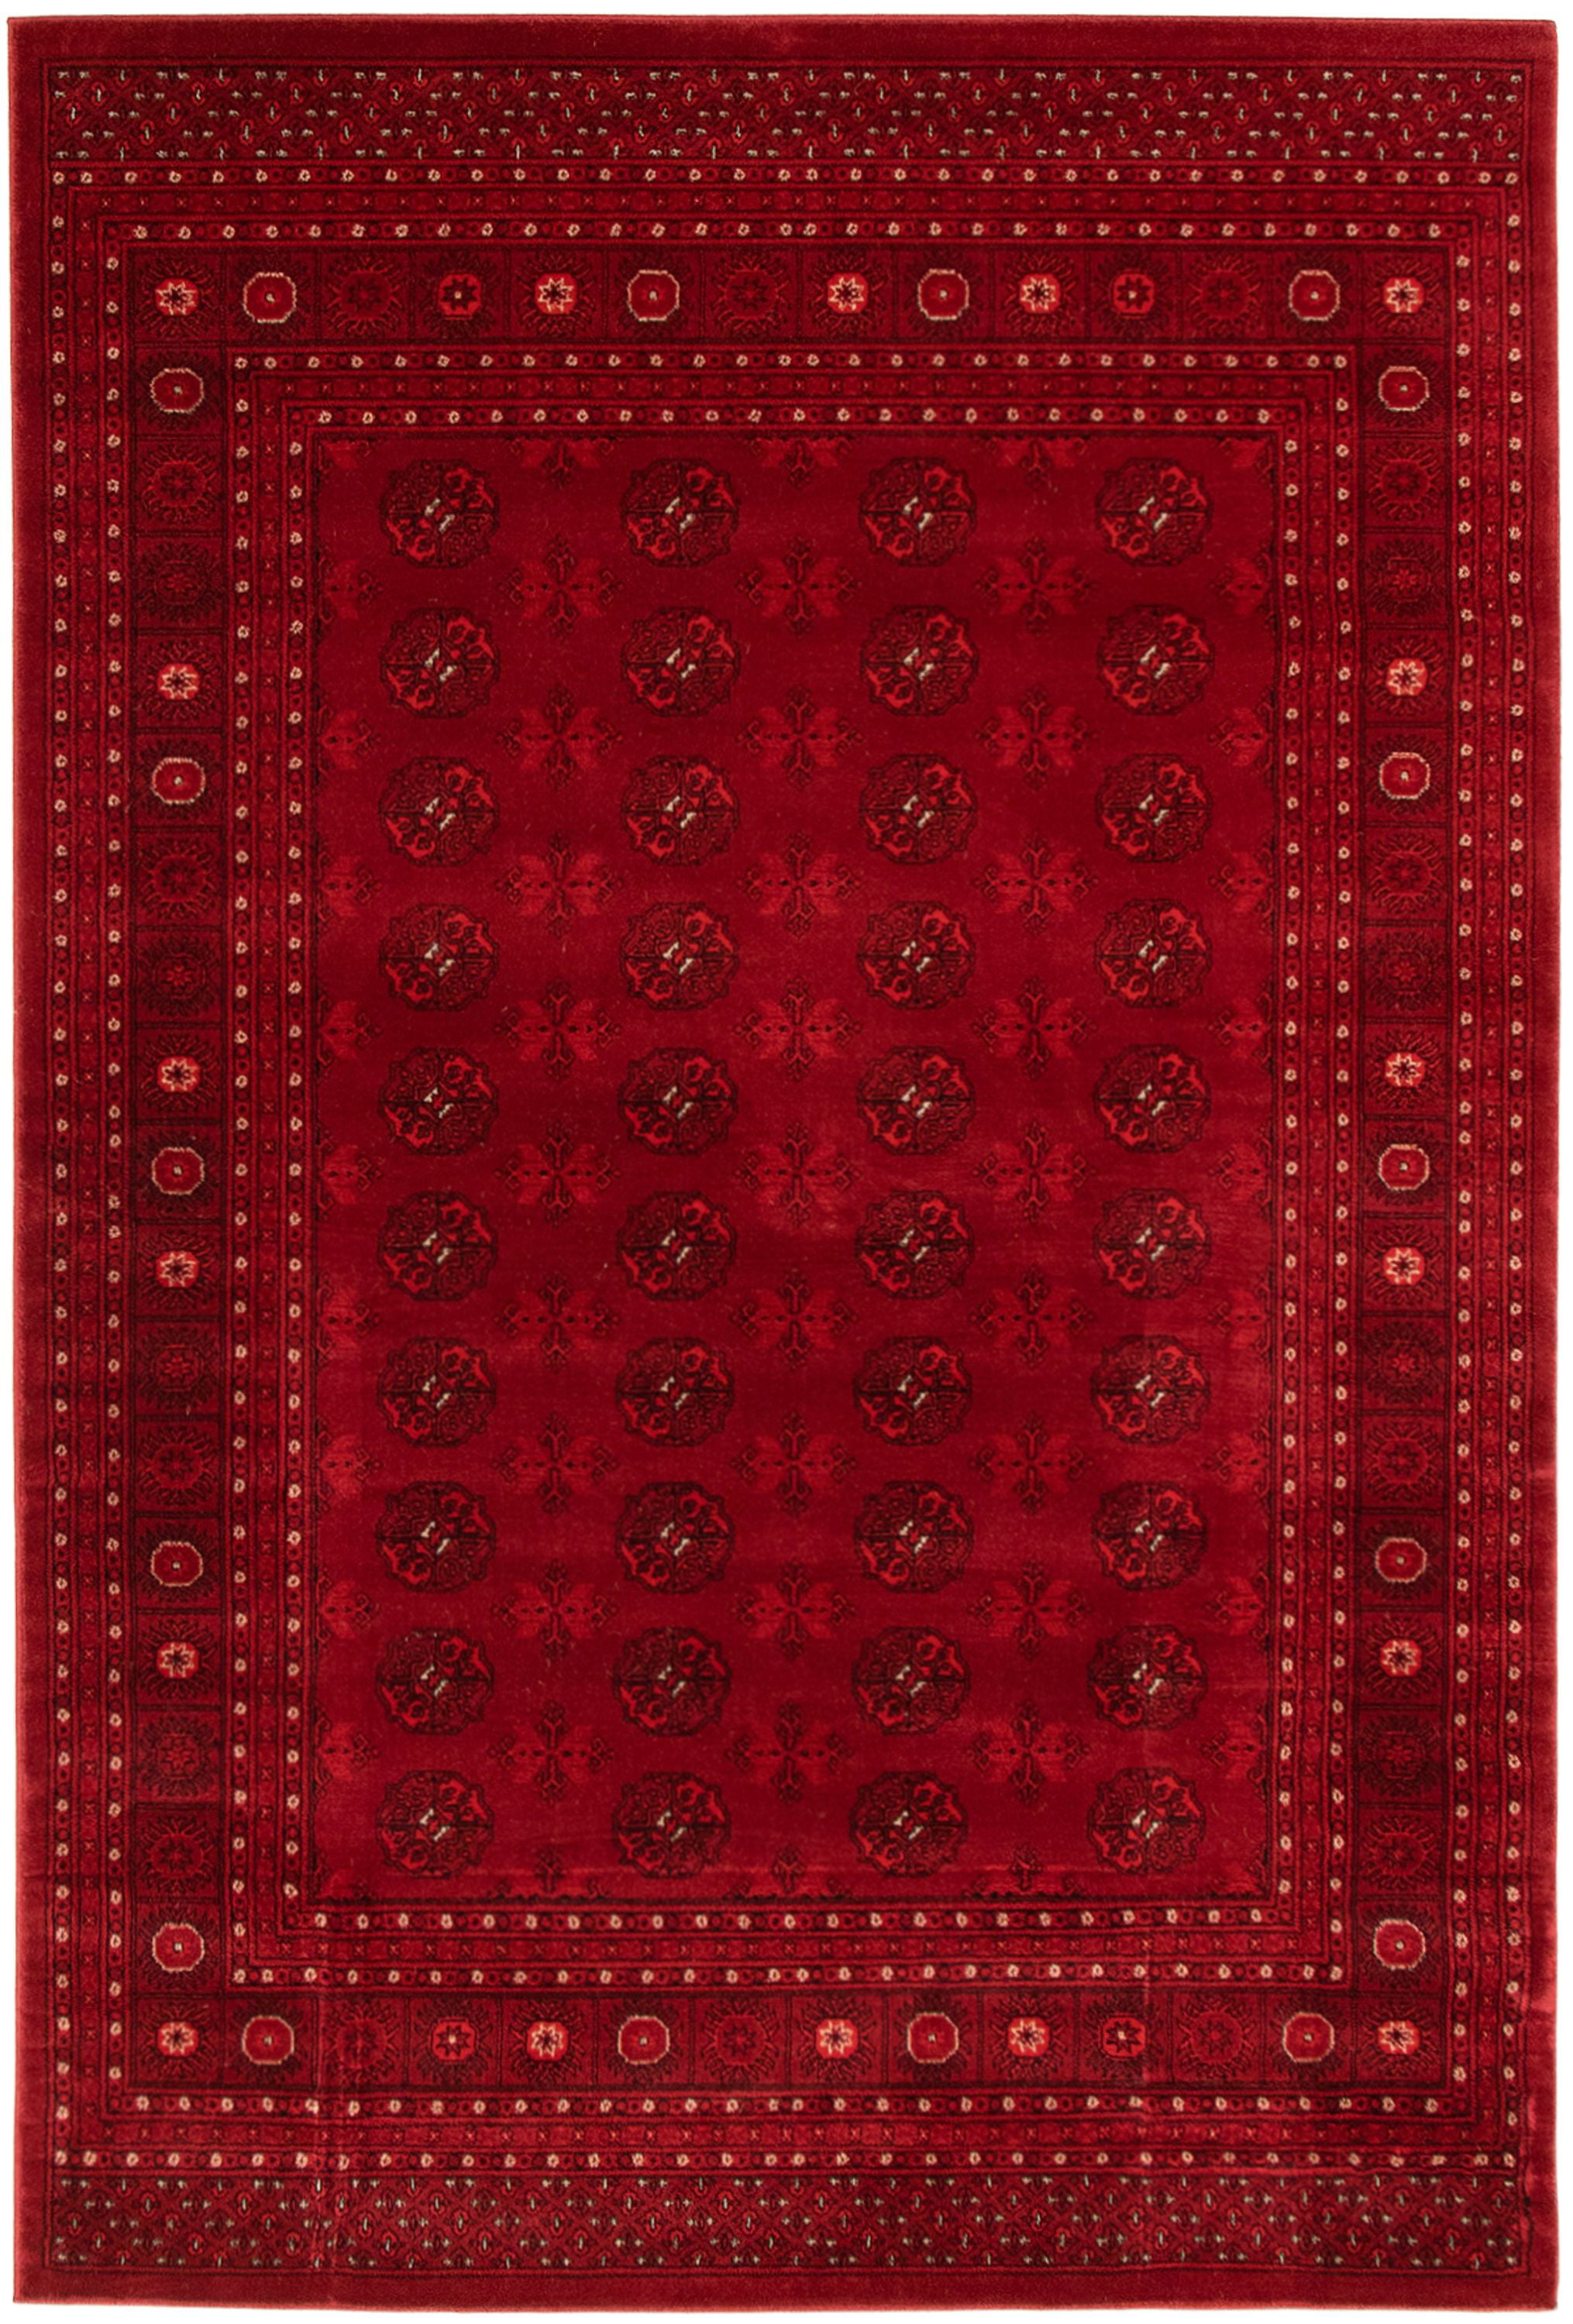 2'11 x 5'1 eCarpet Gallery 328452 Red Area Rug Bordered 